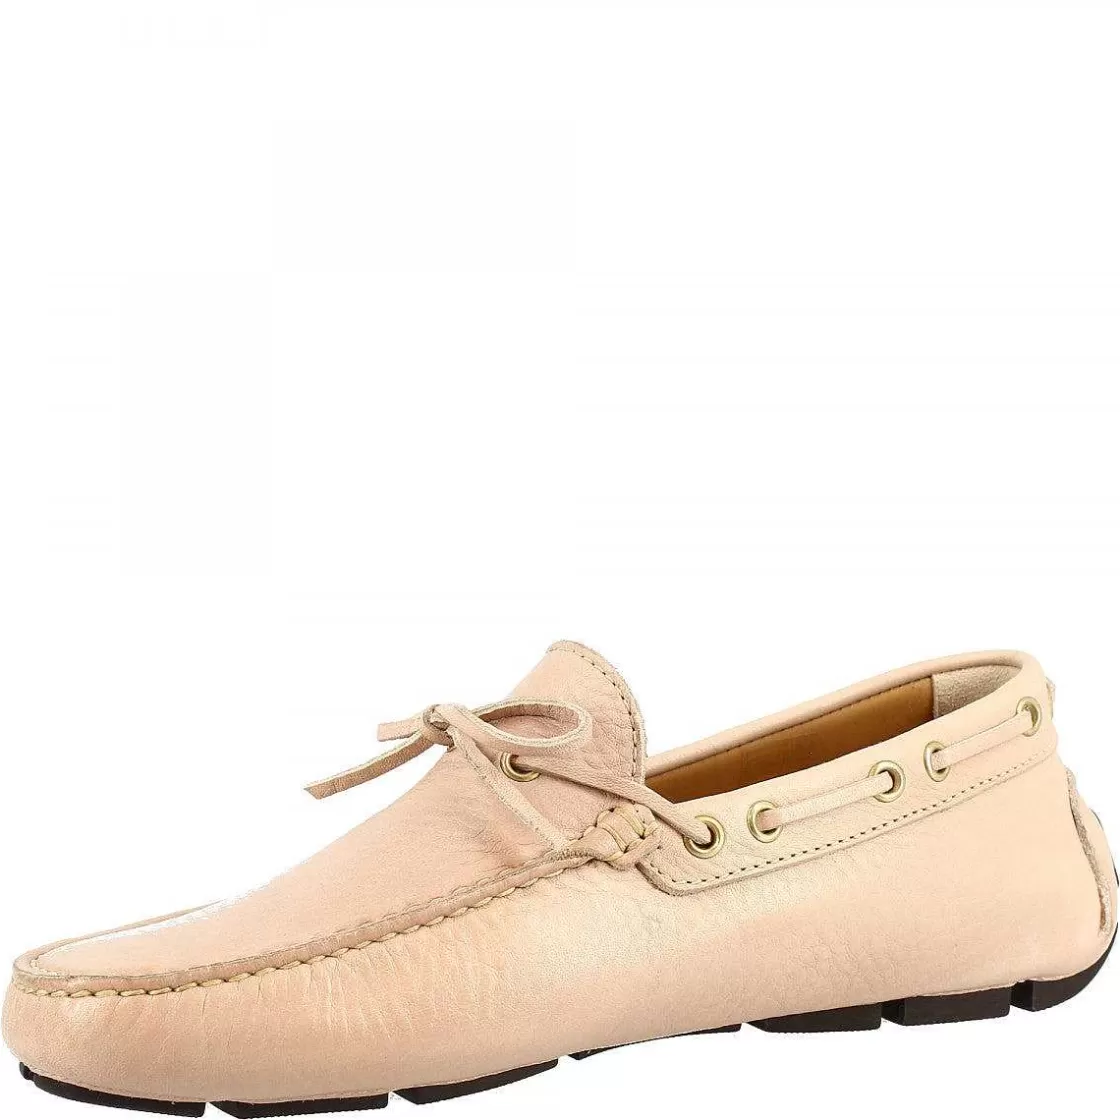 Leonardo Handmade Men'S Lace-Up Boat Moccasins In Taupe Calf Leather Flash Sale